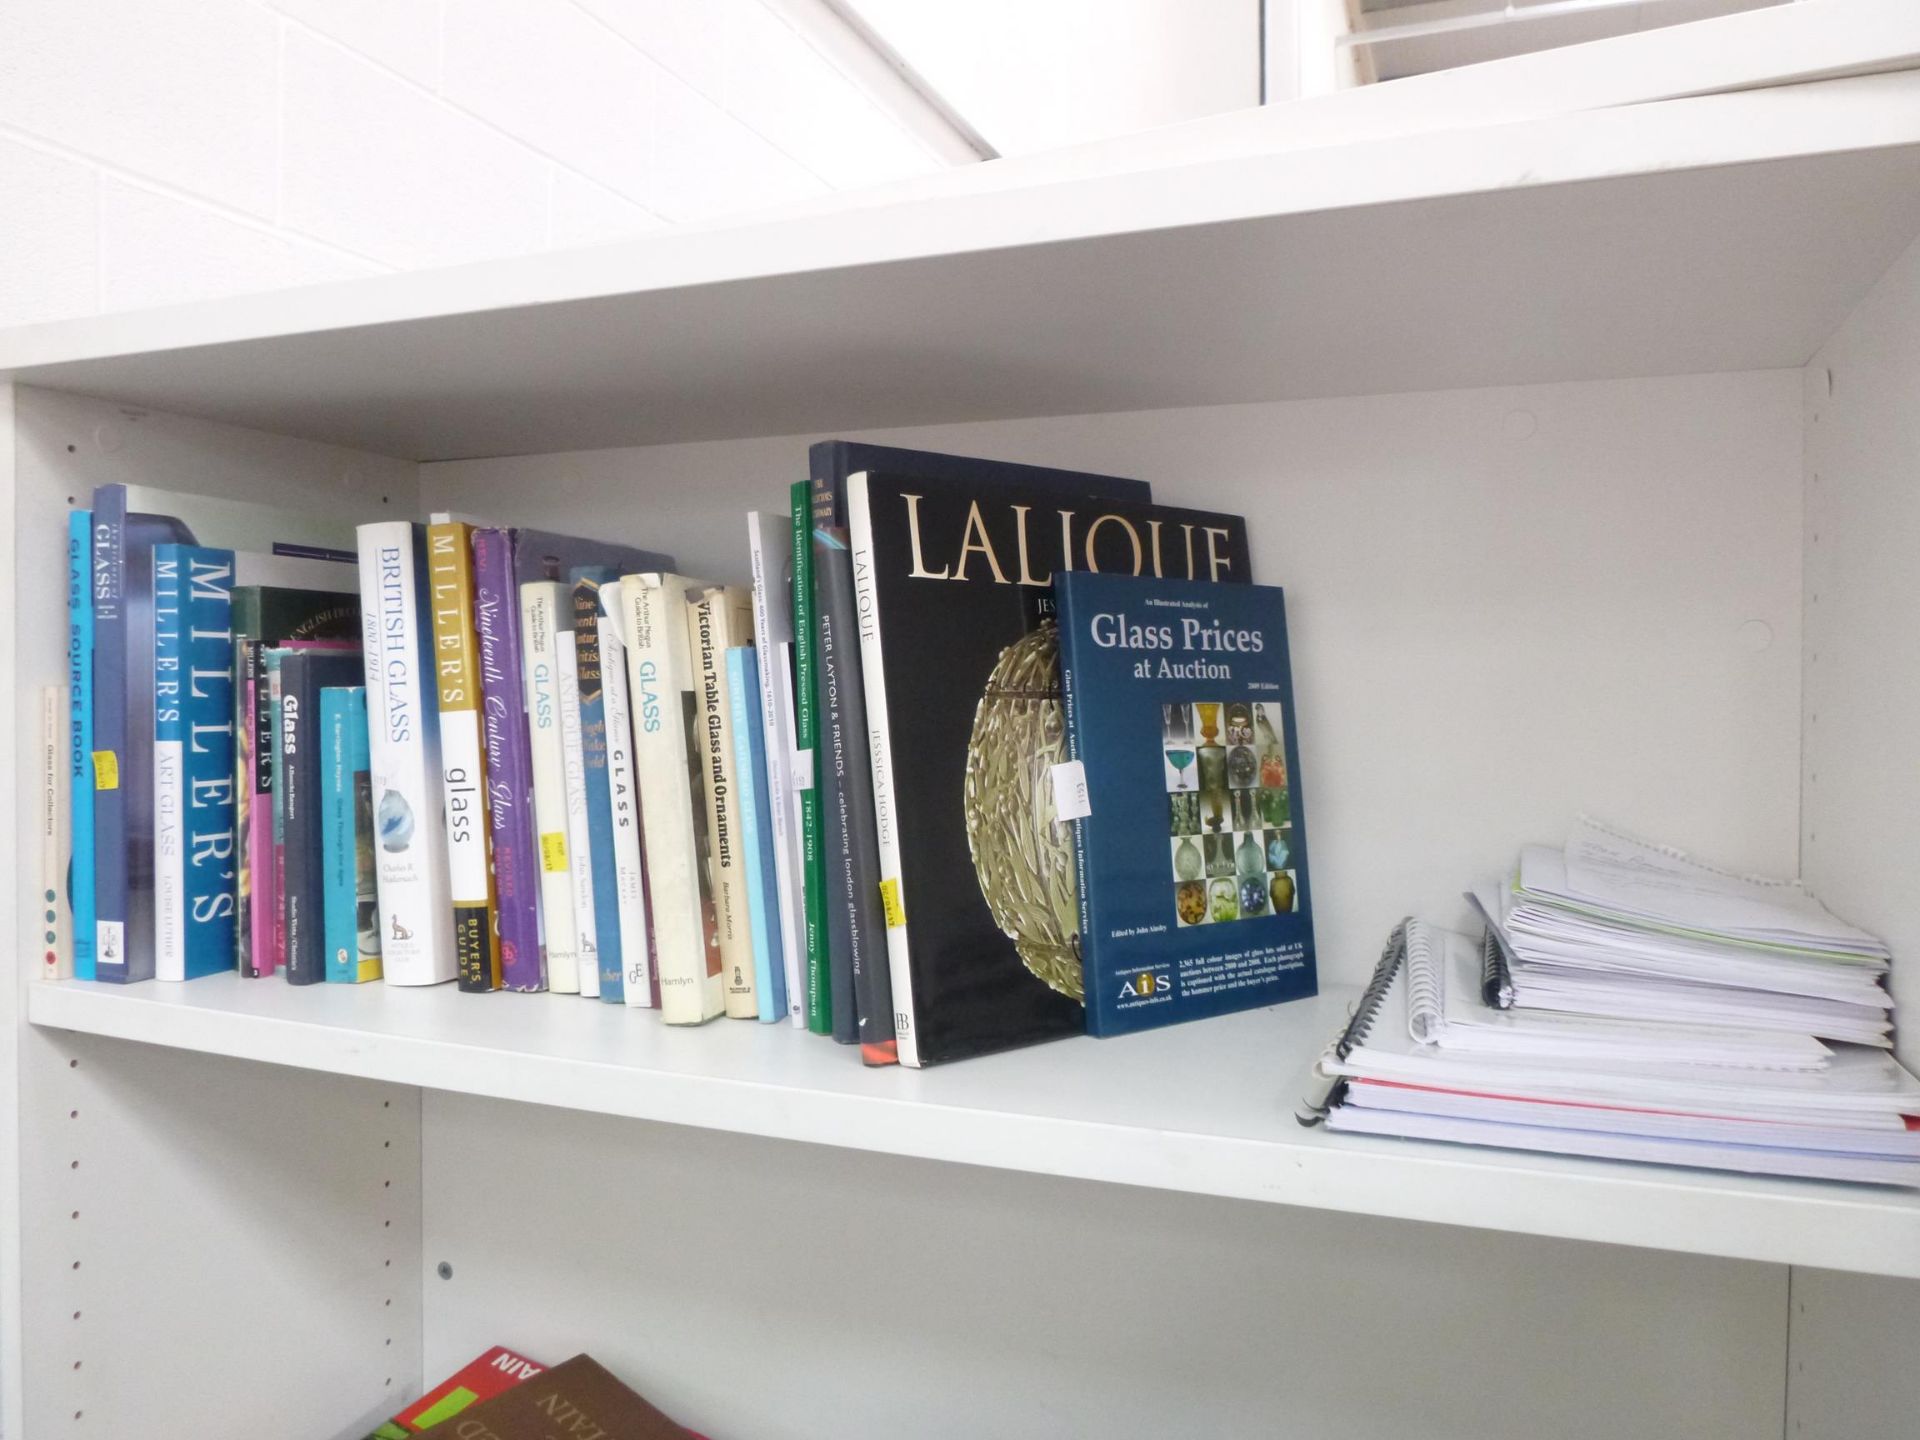 A shelf to contain a selection of books on Glassware such as 'Lalique' - Jessica Hodge, 'Celebrating